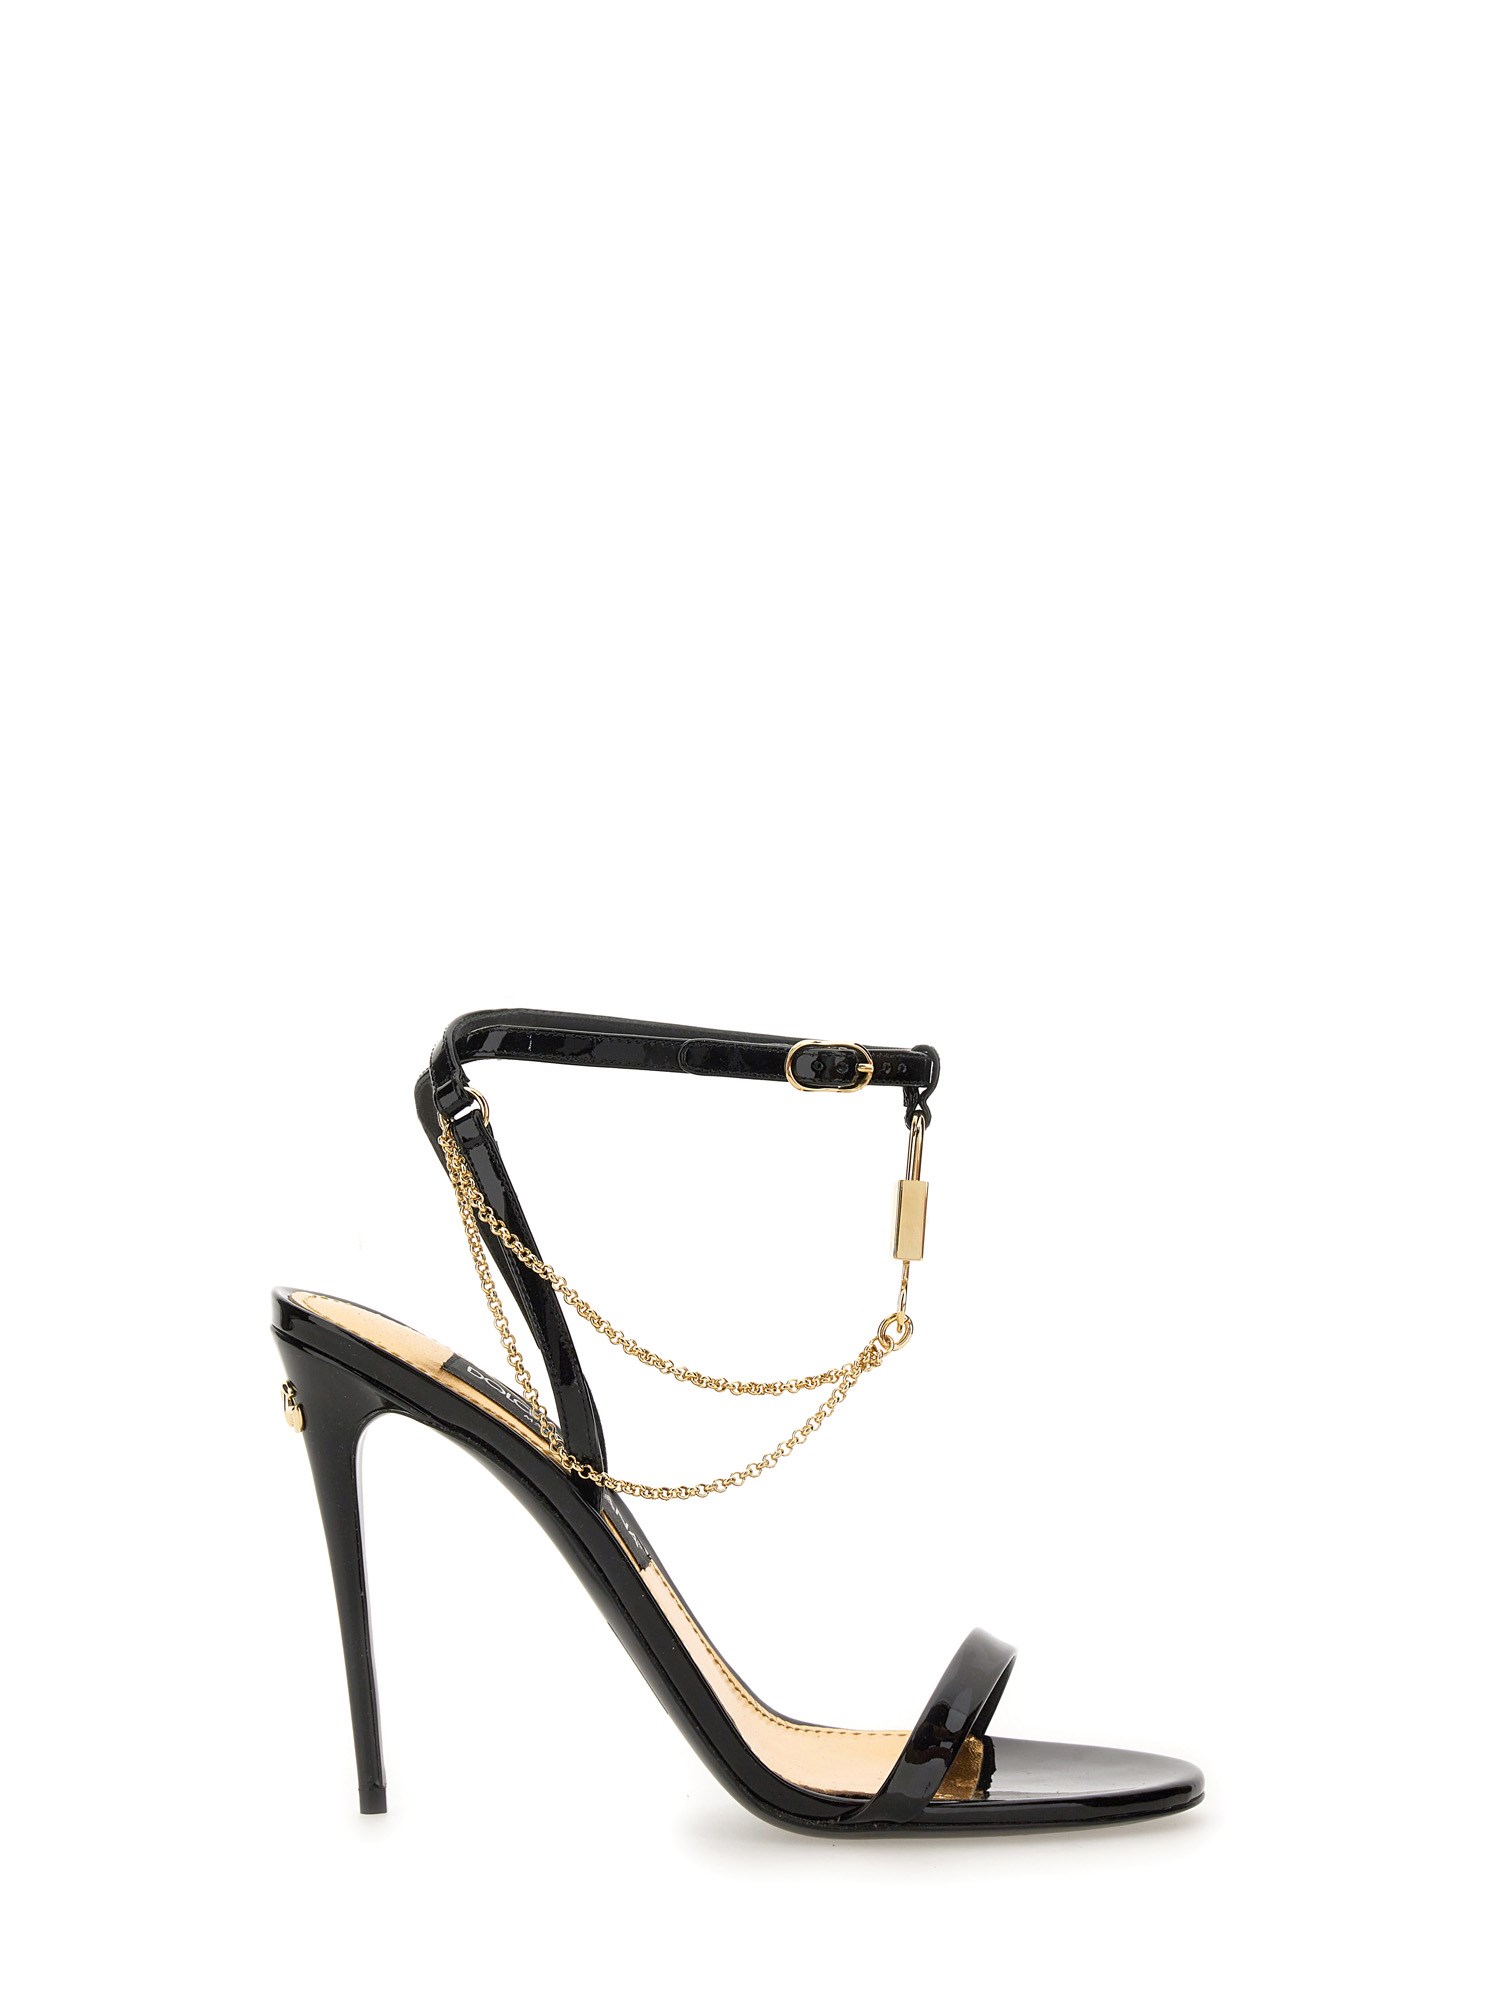 Dolce & Gabbana Sandal With Chain And Charm In Black